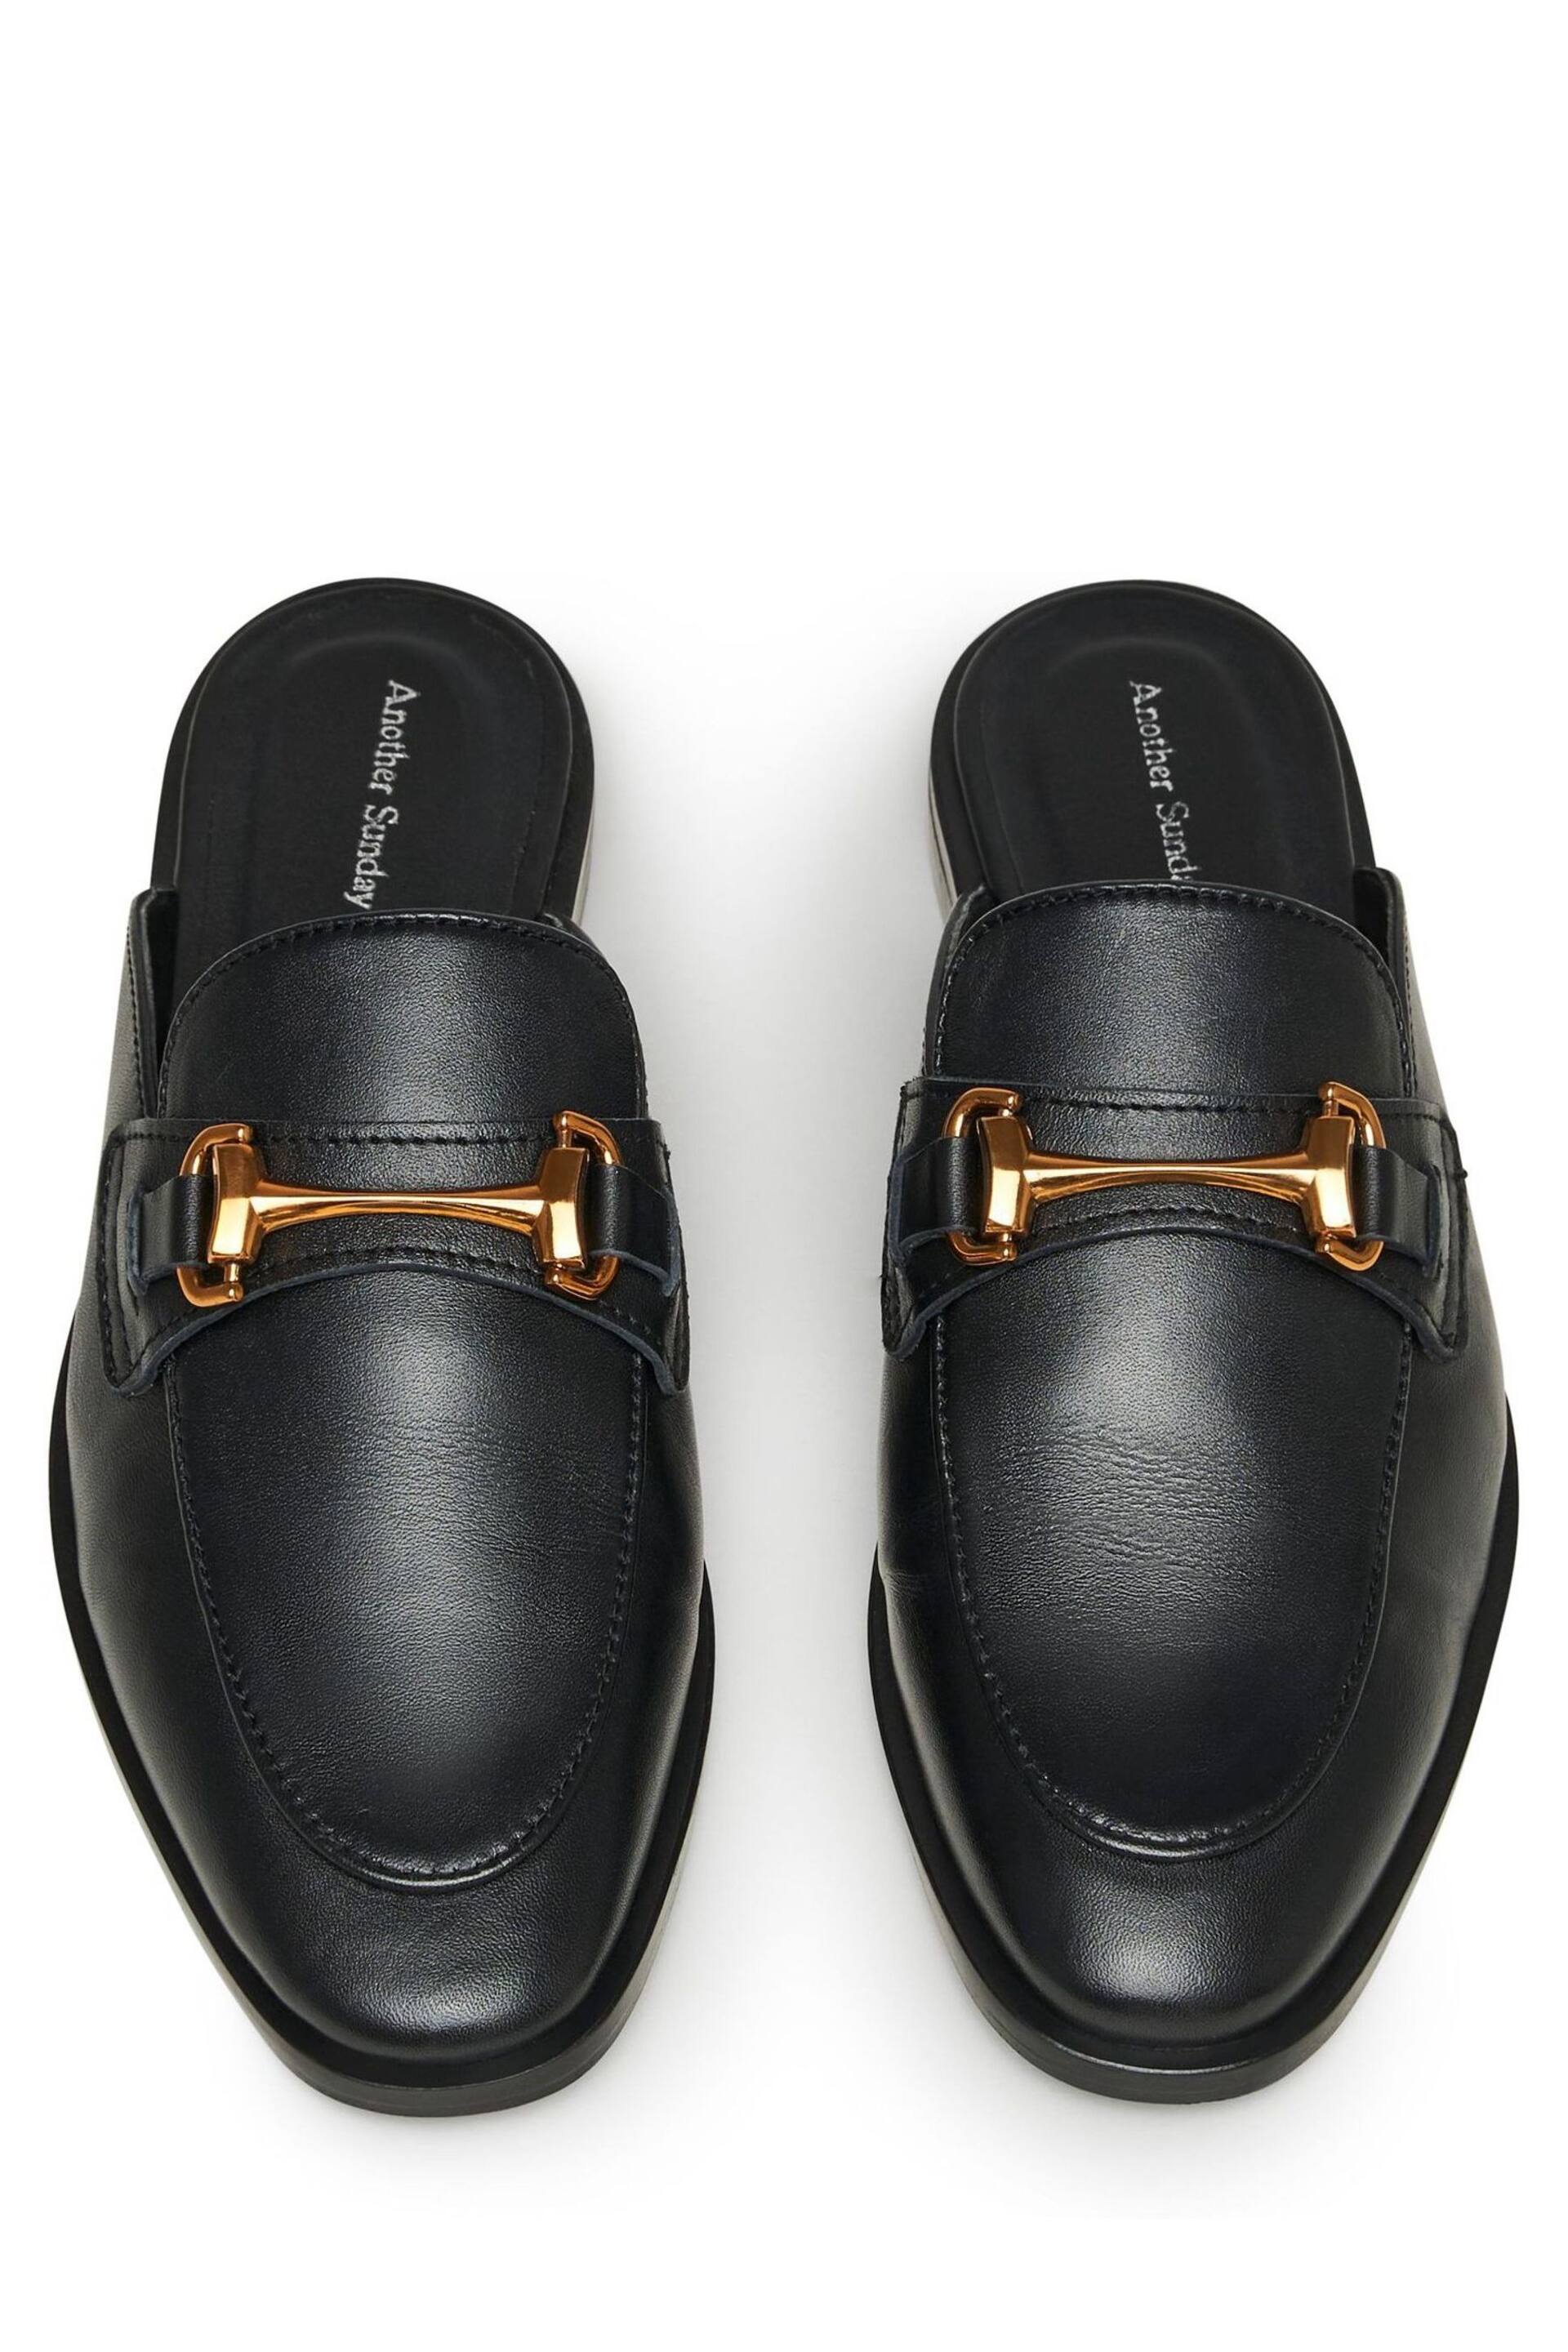 Another Sunday Slip On Black Loafers With Gold Buckle Detail - Image 4 of 5